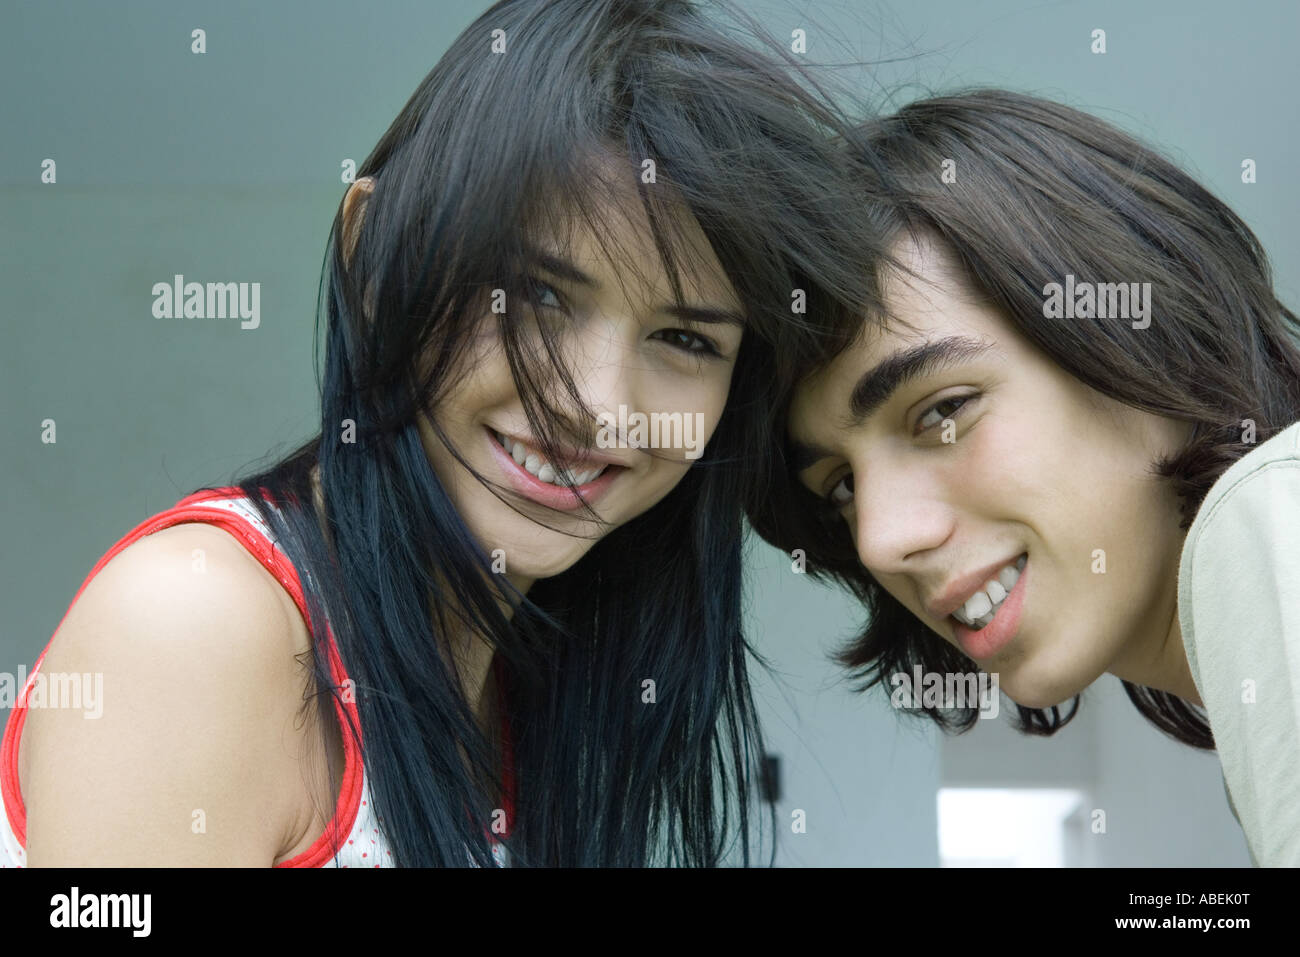 Young couple with heads together, smiling at camera Stock Photo